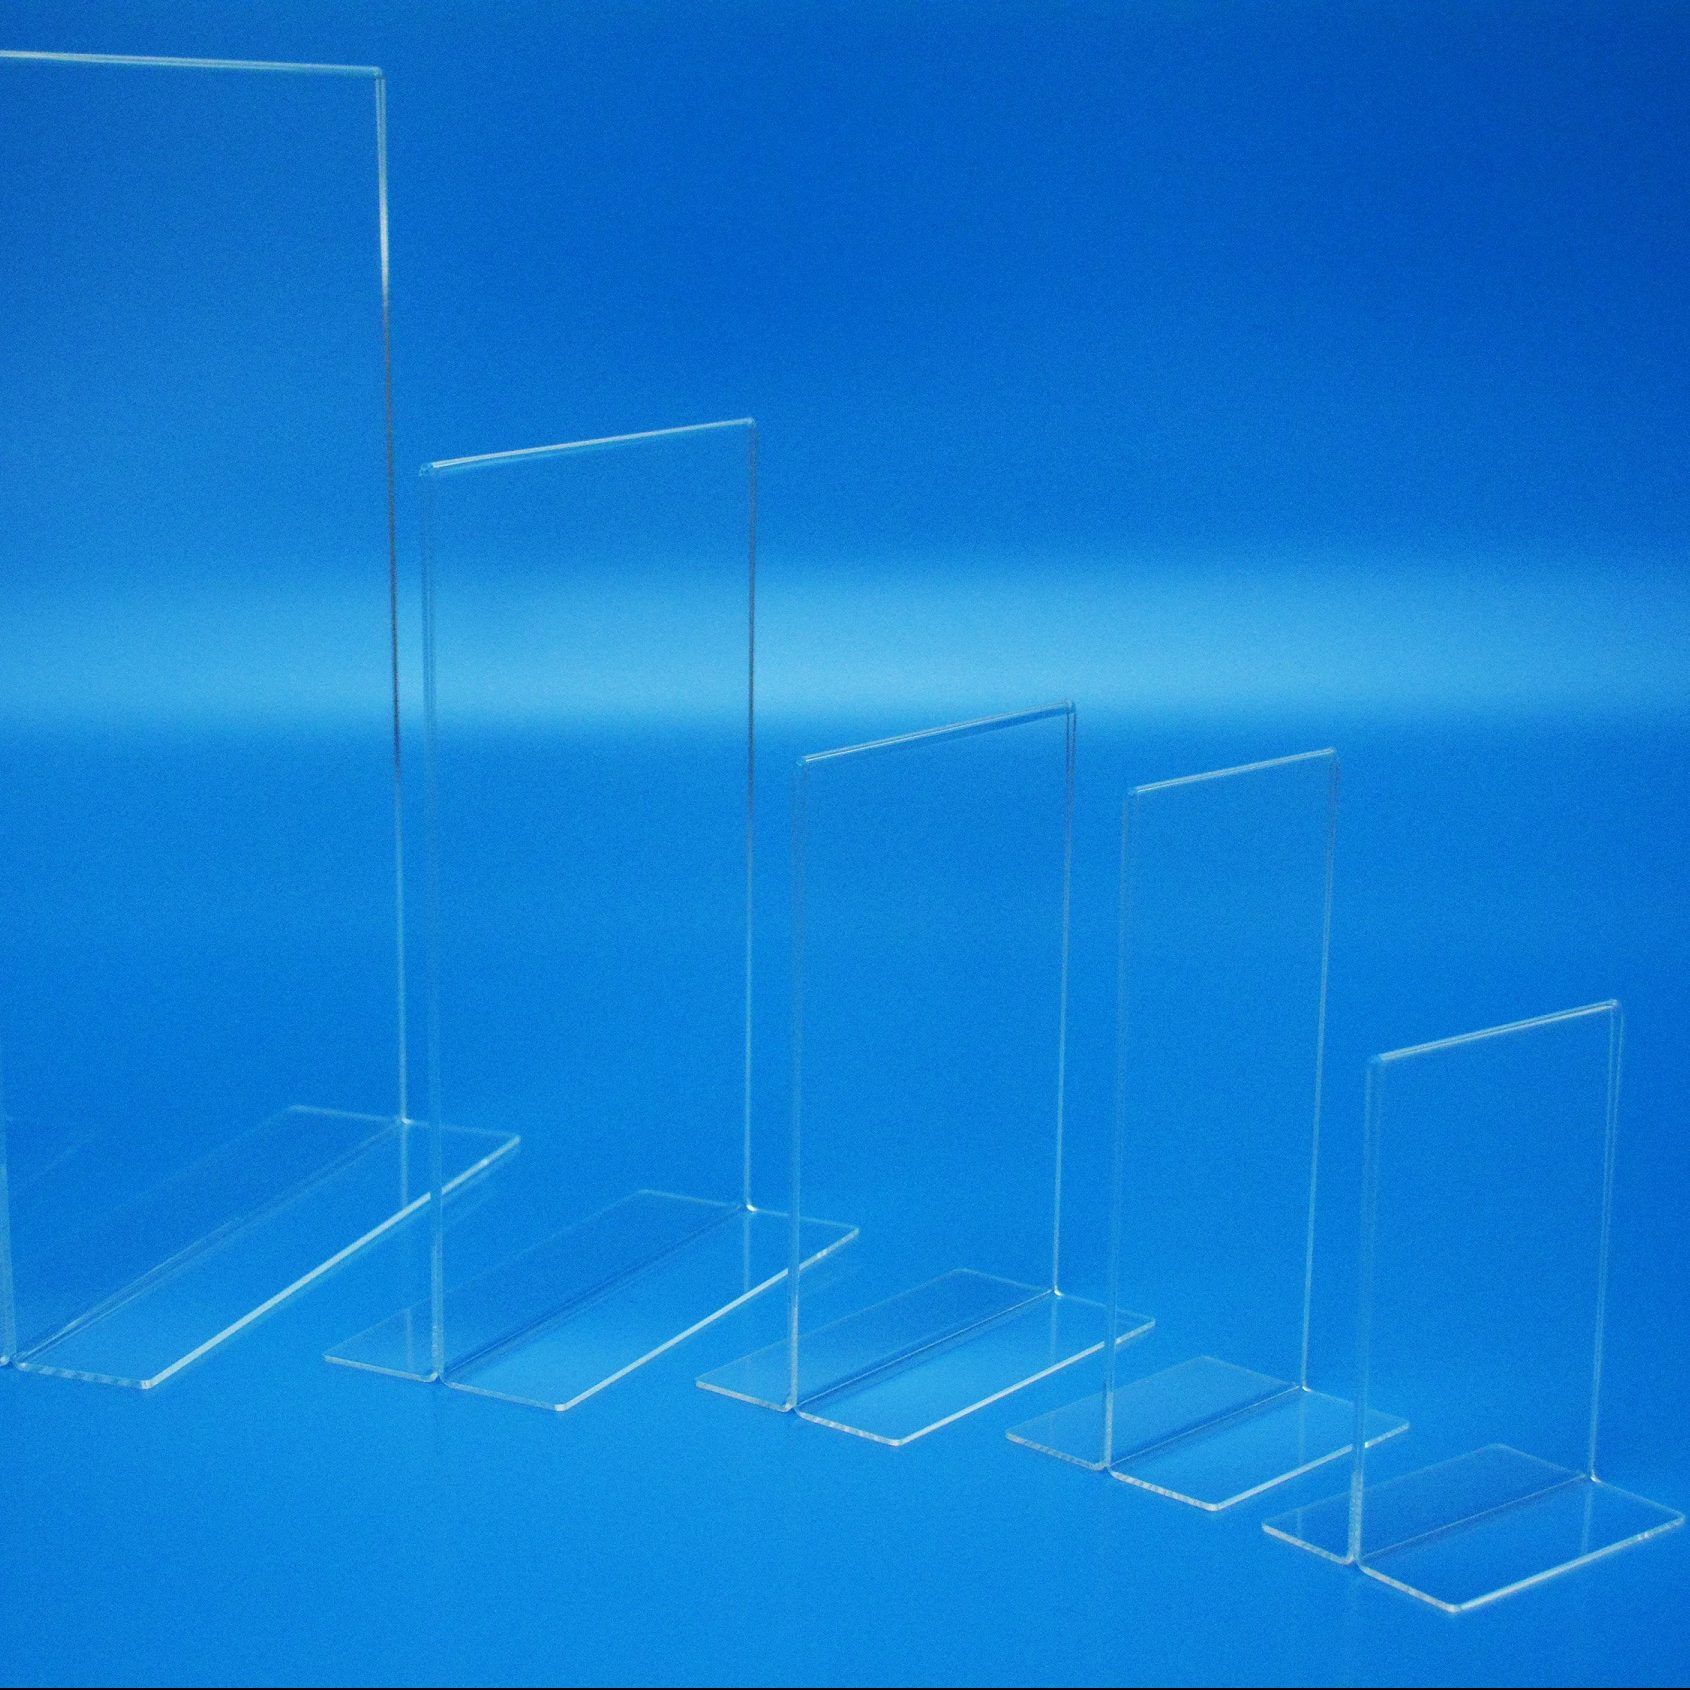 Portrait vertical menu holders manufactured in clear acrylic and showing a range of available sizes.